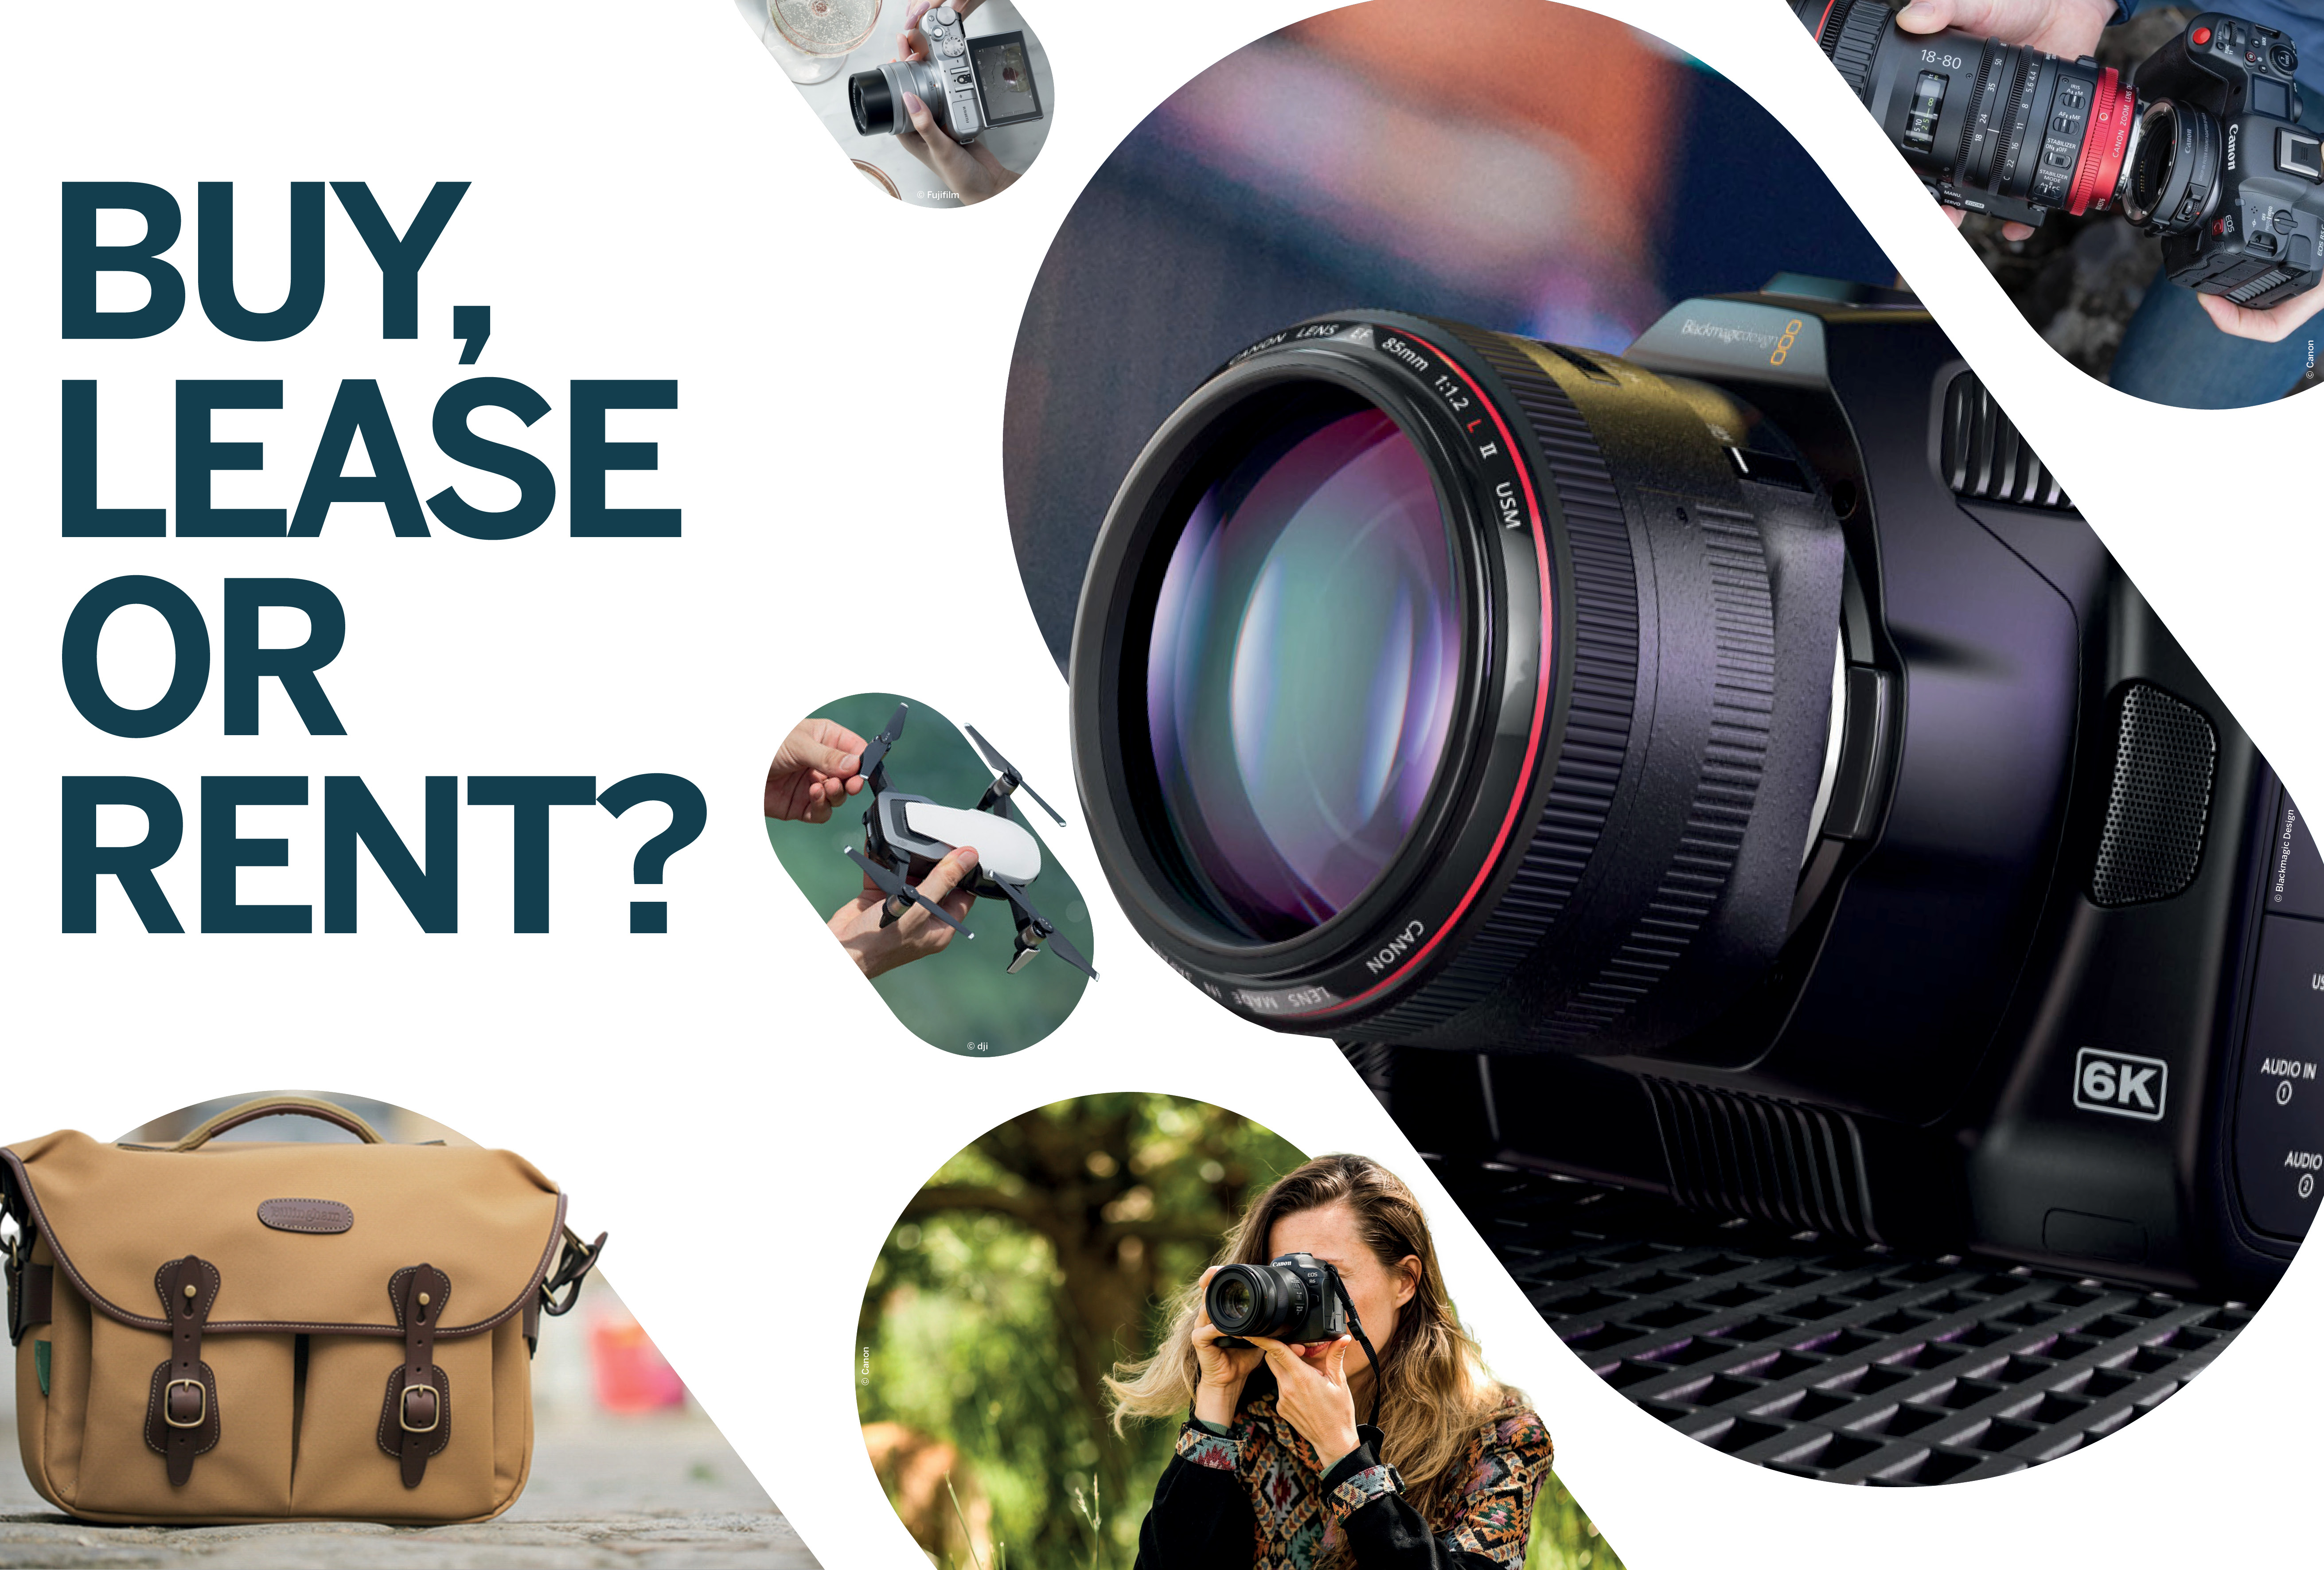 What you need to know about renting camera gear | Digital Camera World